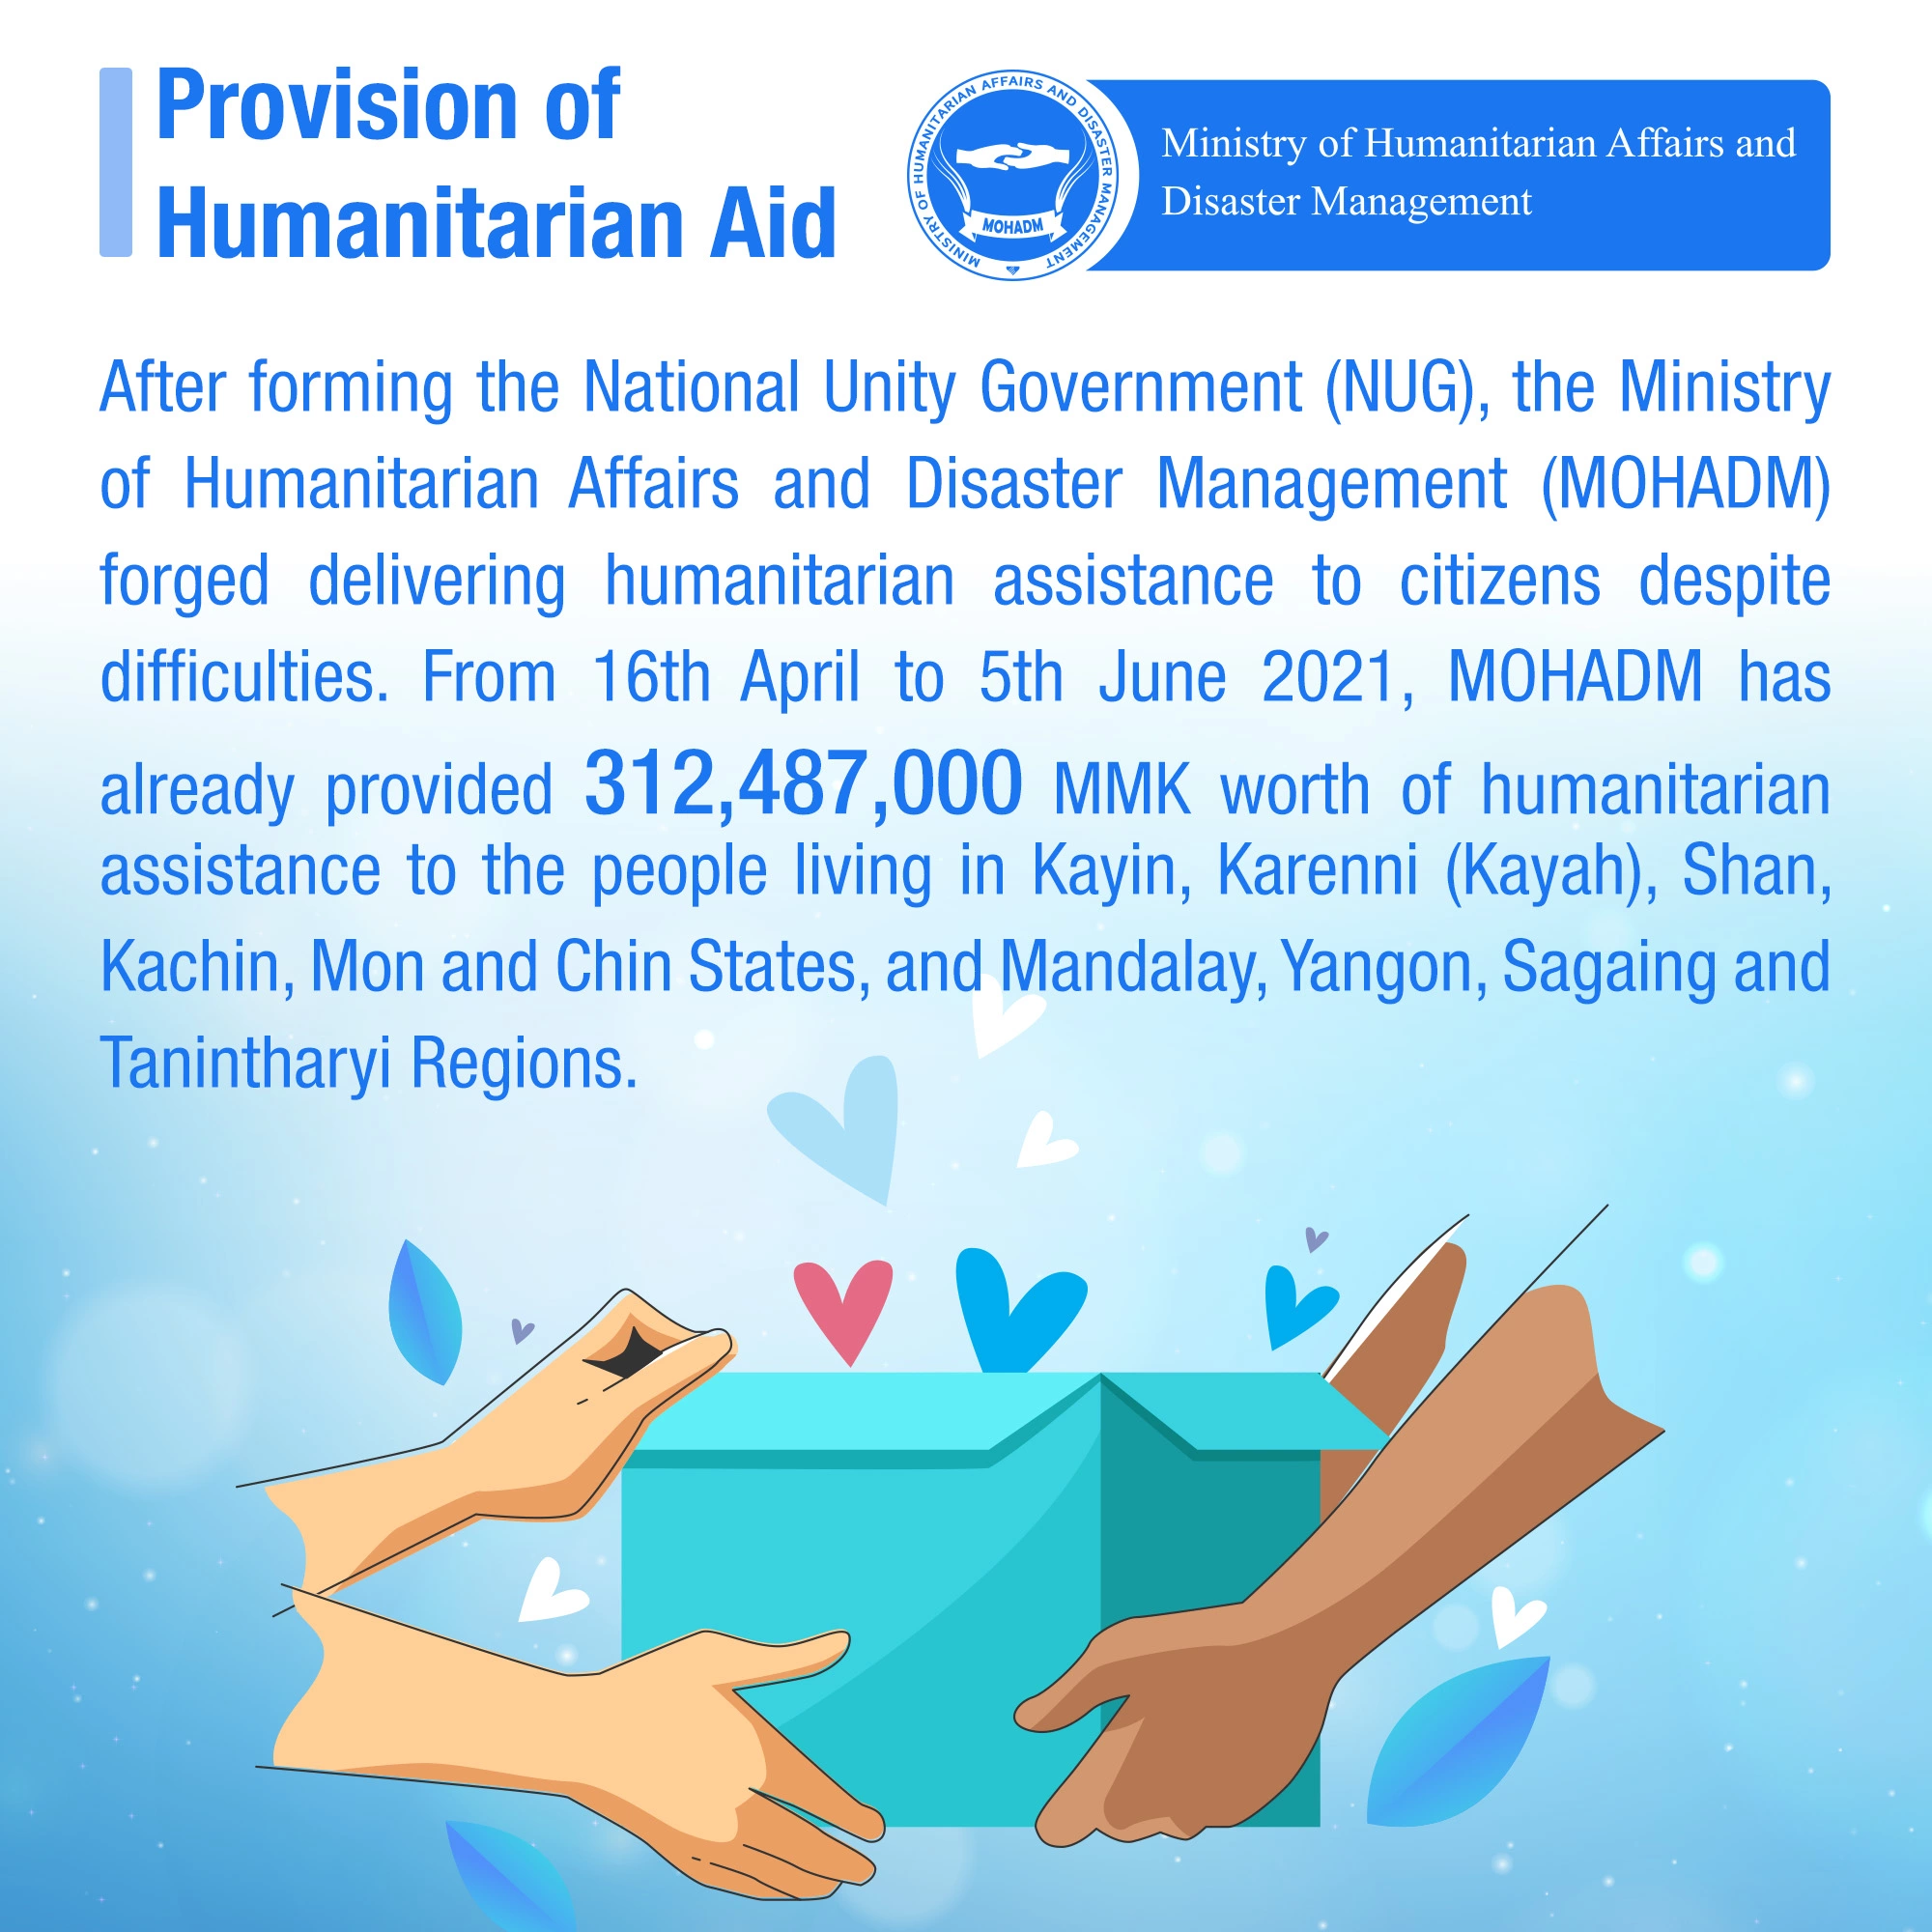 Summary of humanitarian aid provision by MoHADM